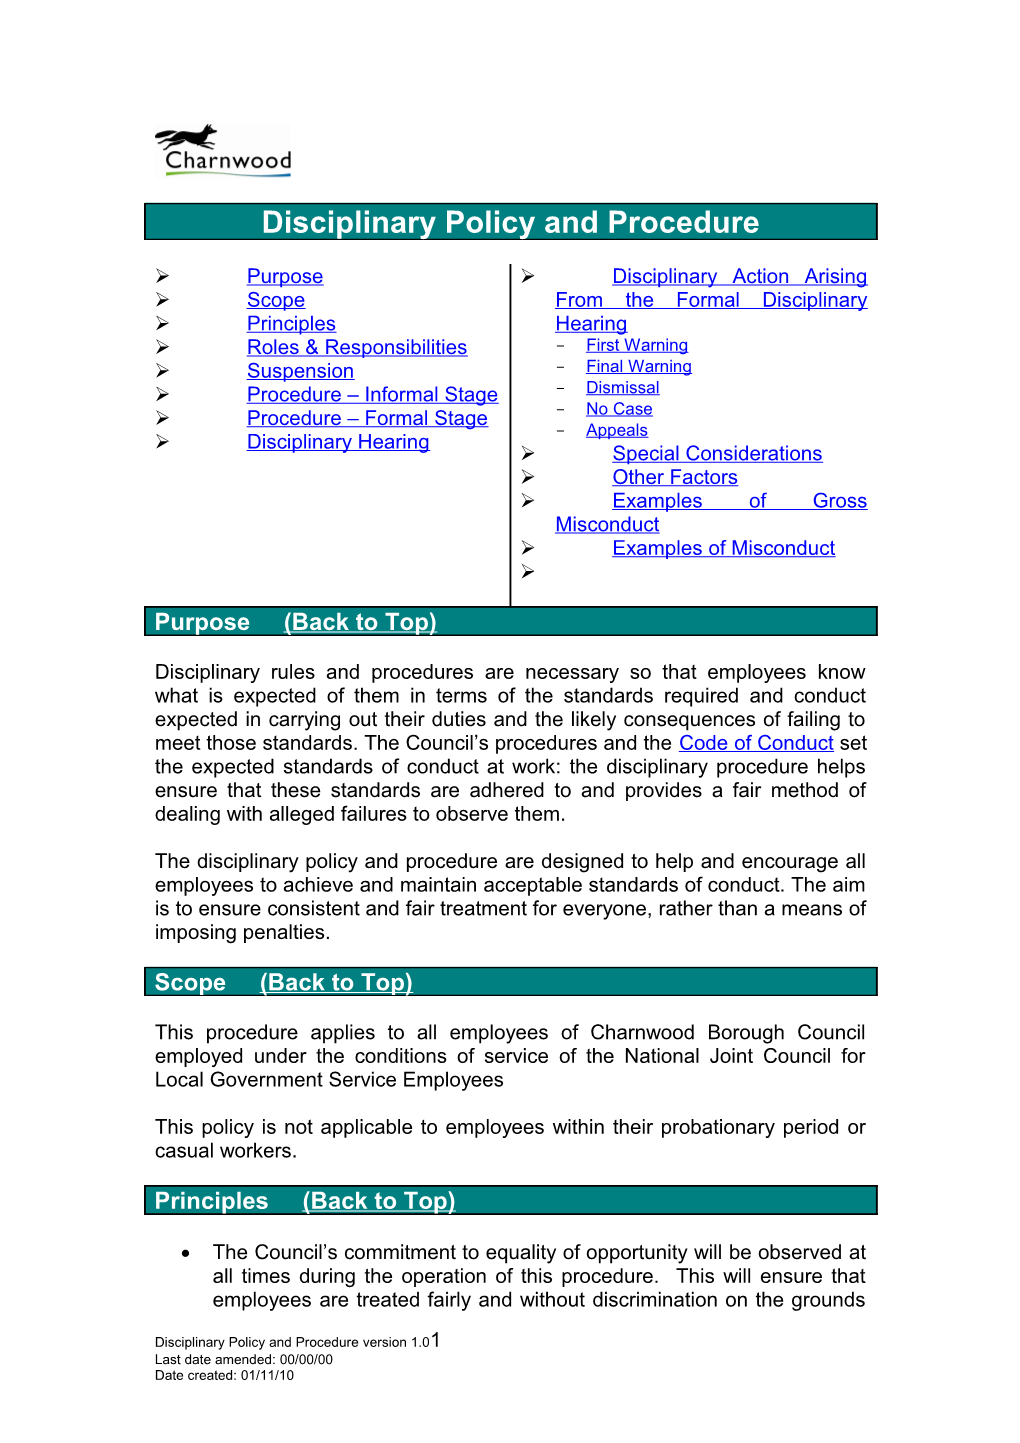 Charnwood Disciplinary Policy and Procedure